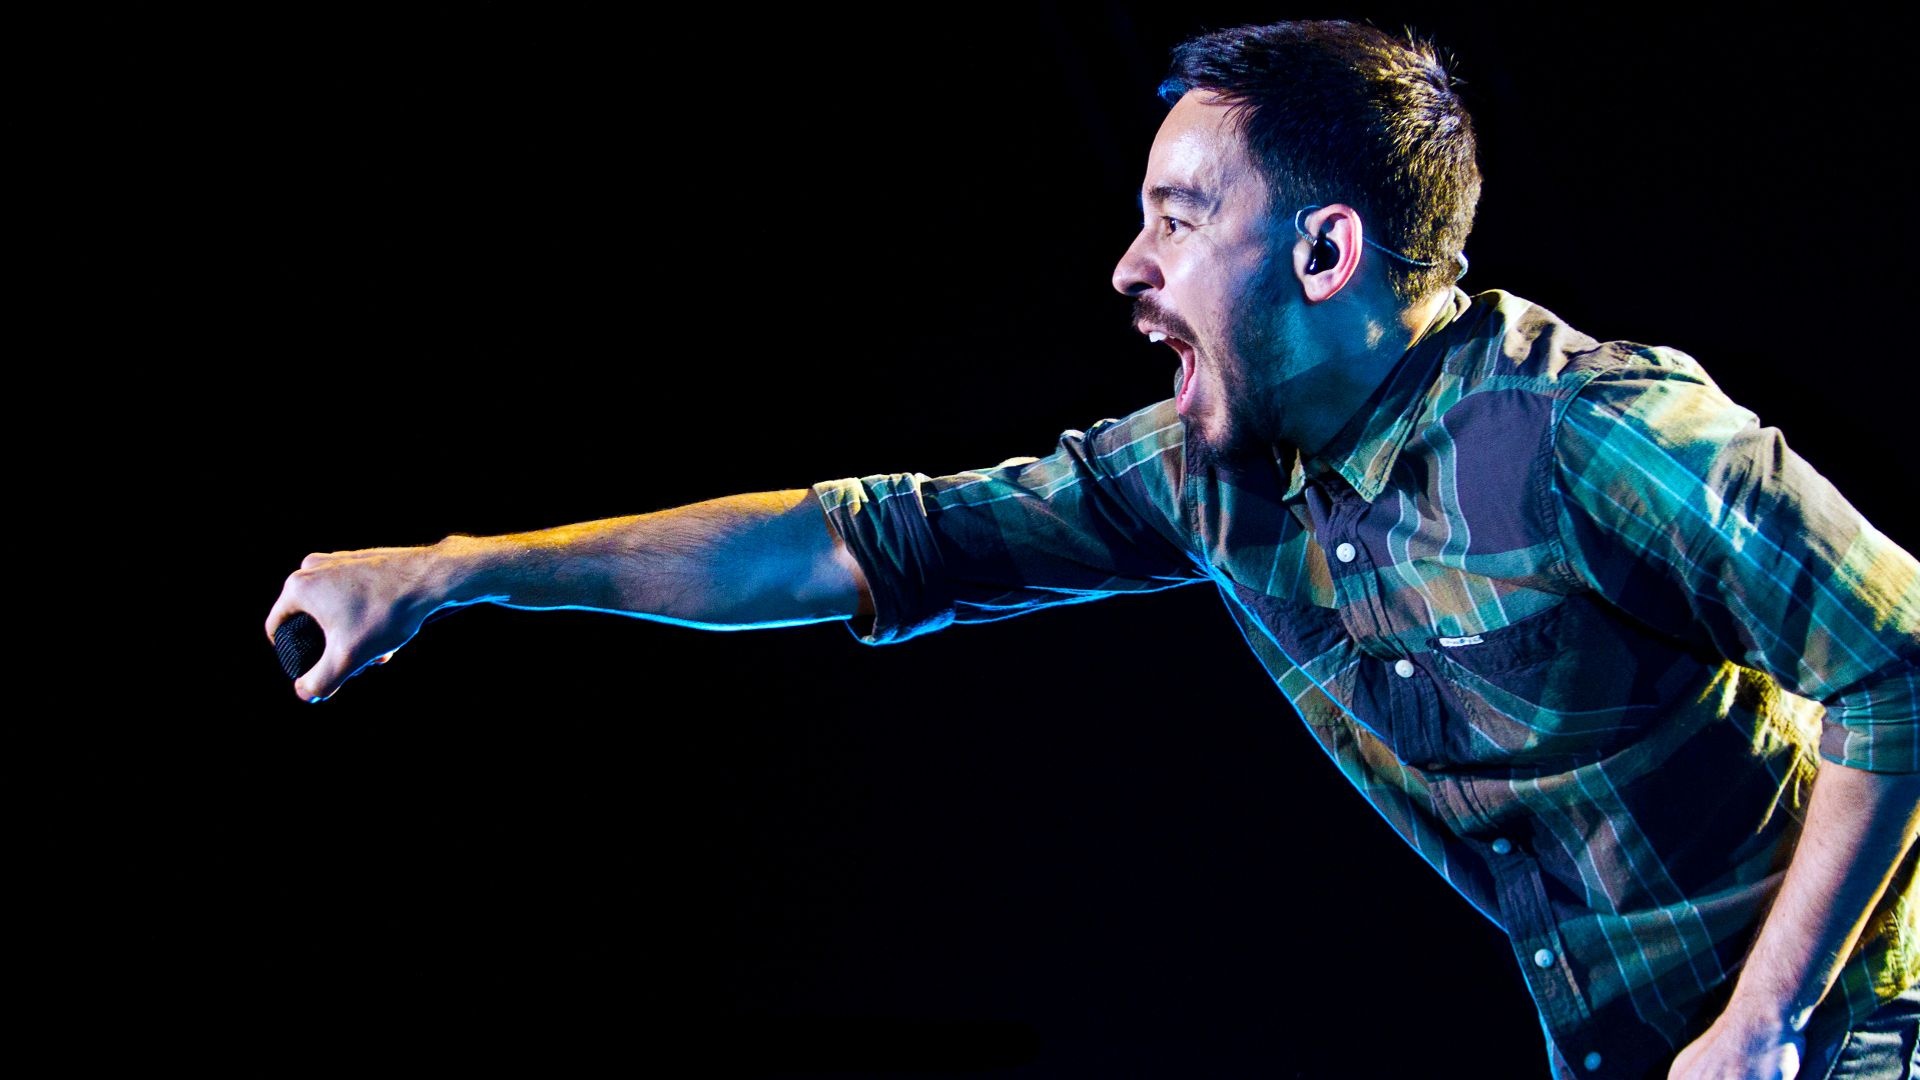 Mike Shinoda Wallpaper posted by Michelle Anderson 1920x1080